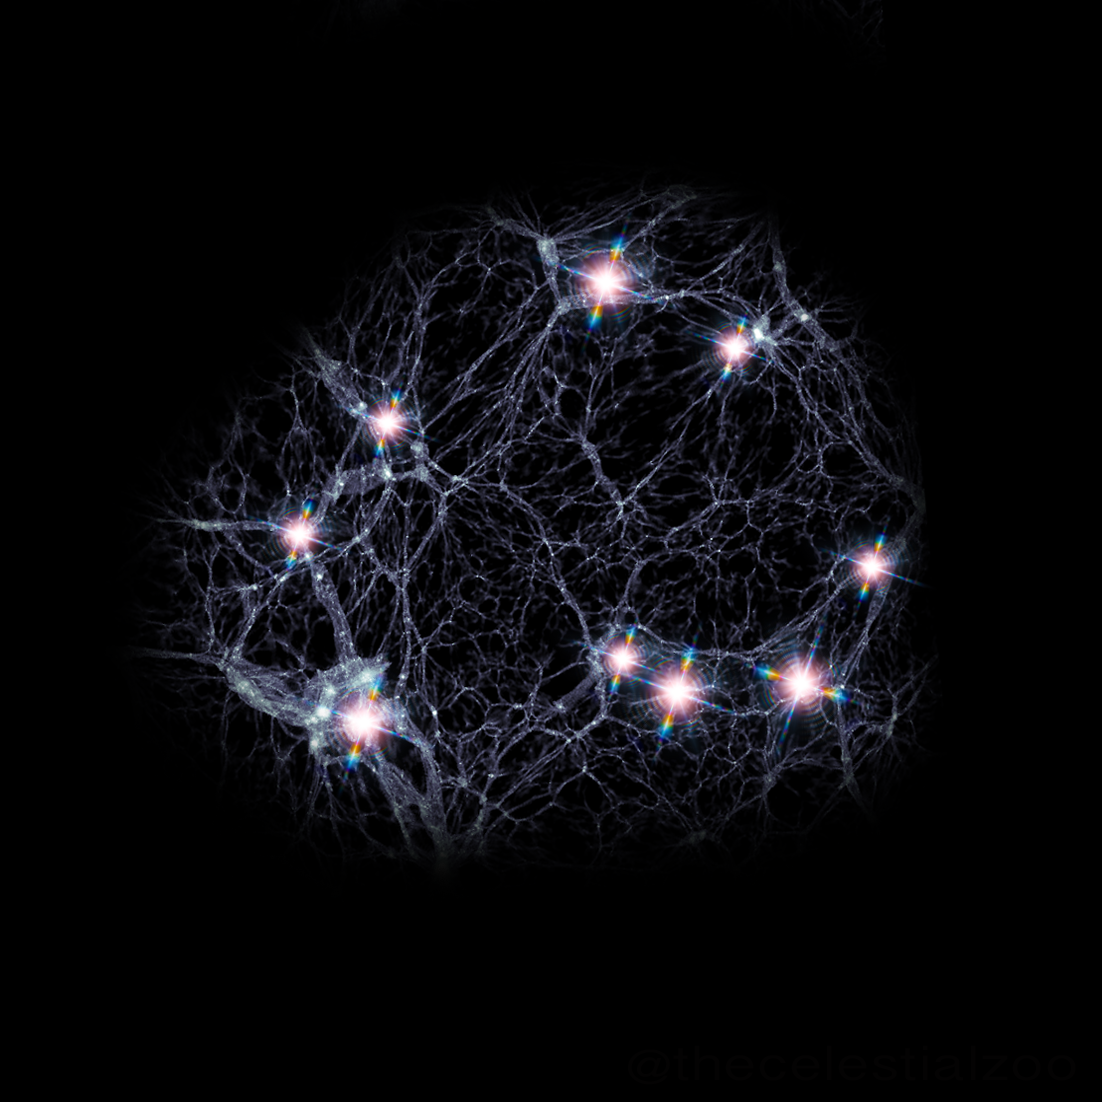 A black background with a cluster of lights on it, resembling a giant ring.